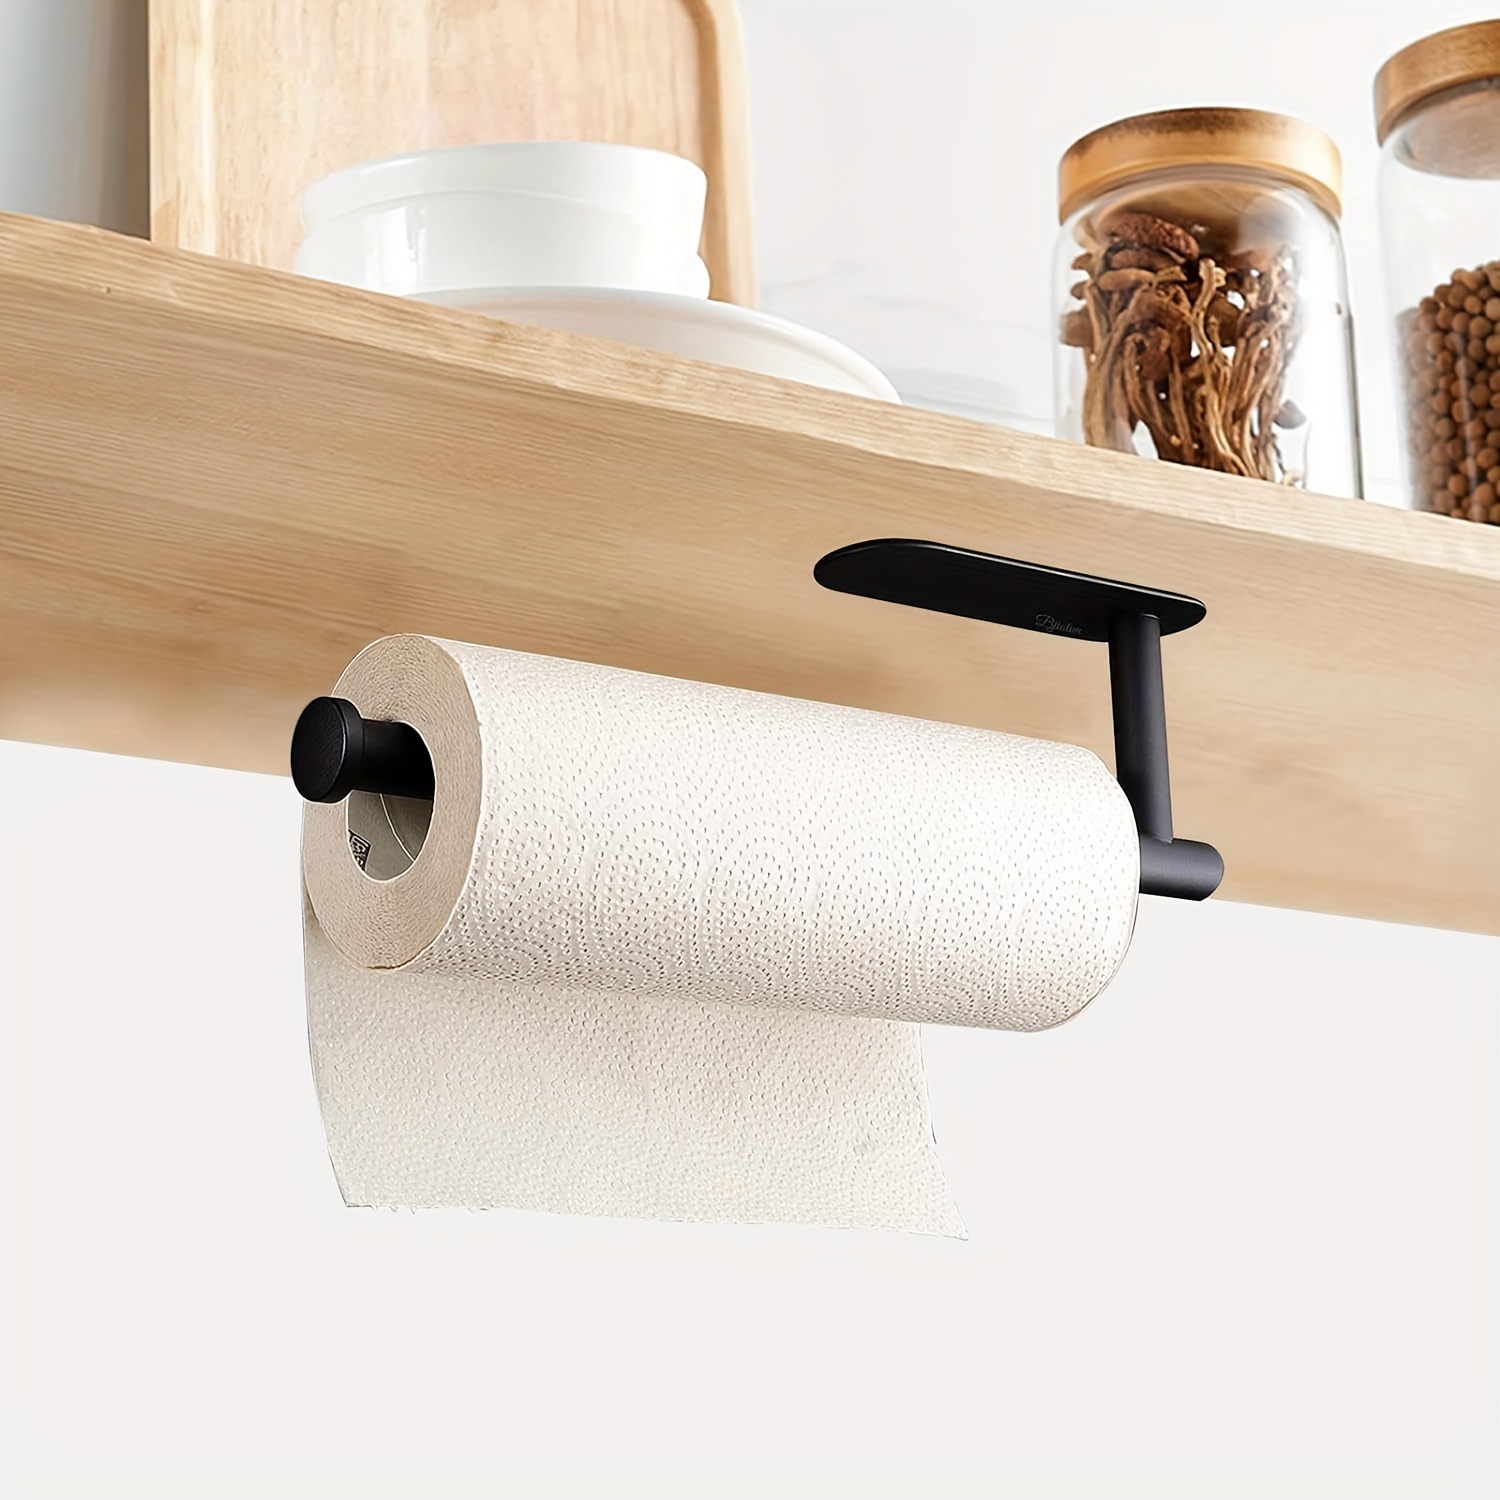 1pcs Paper Towel Holder Under Cabinet with Damping for Kitchen